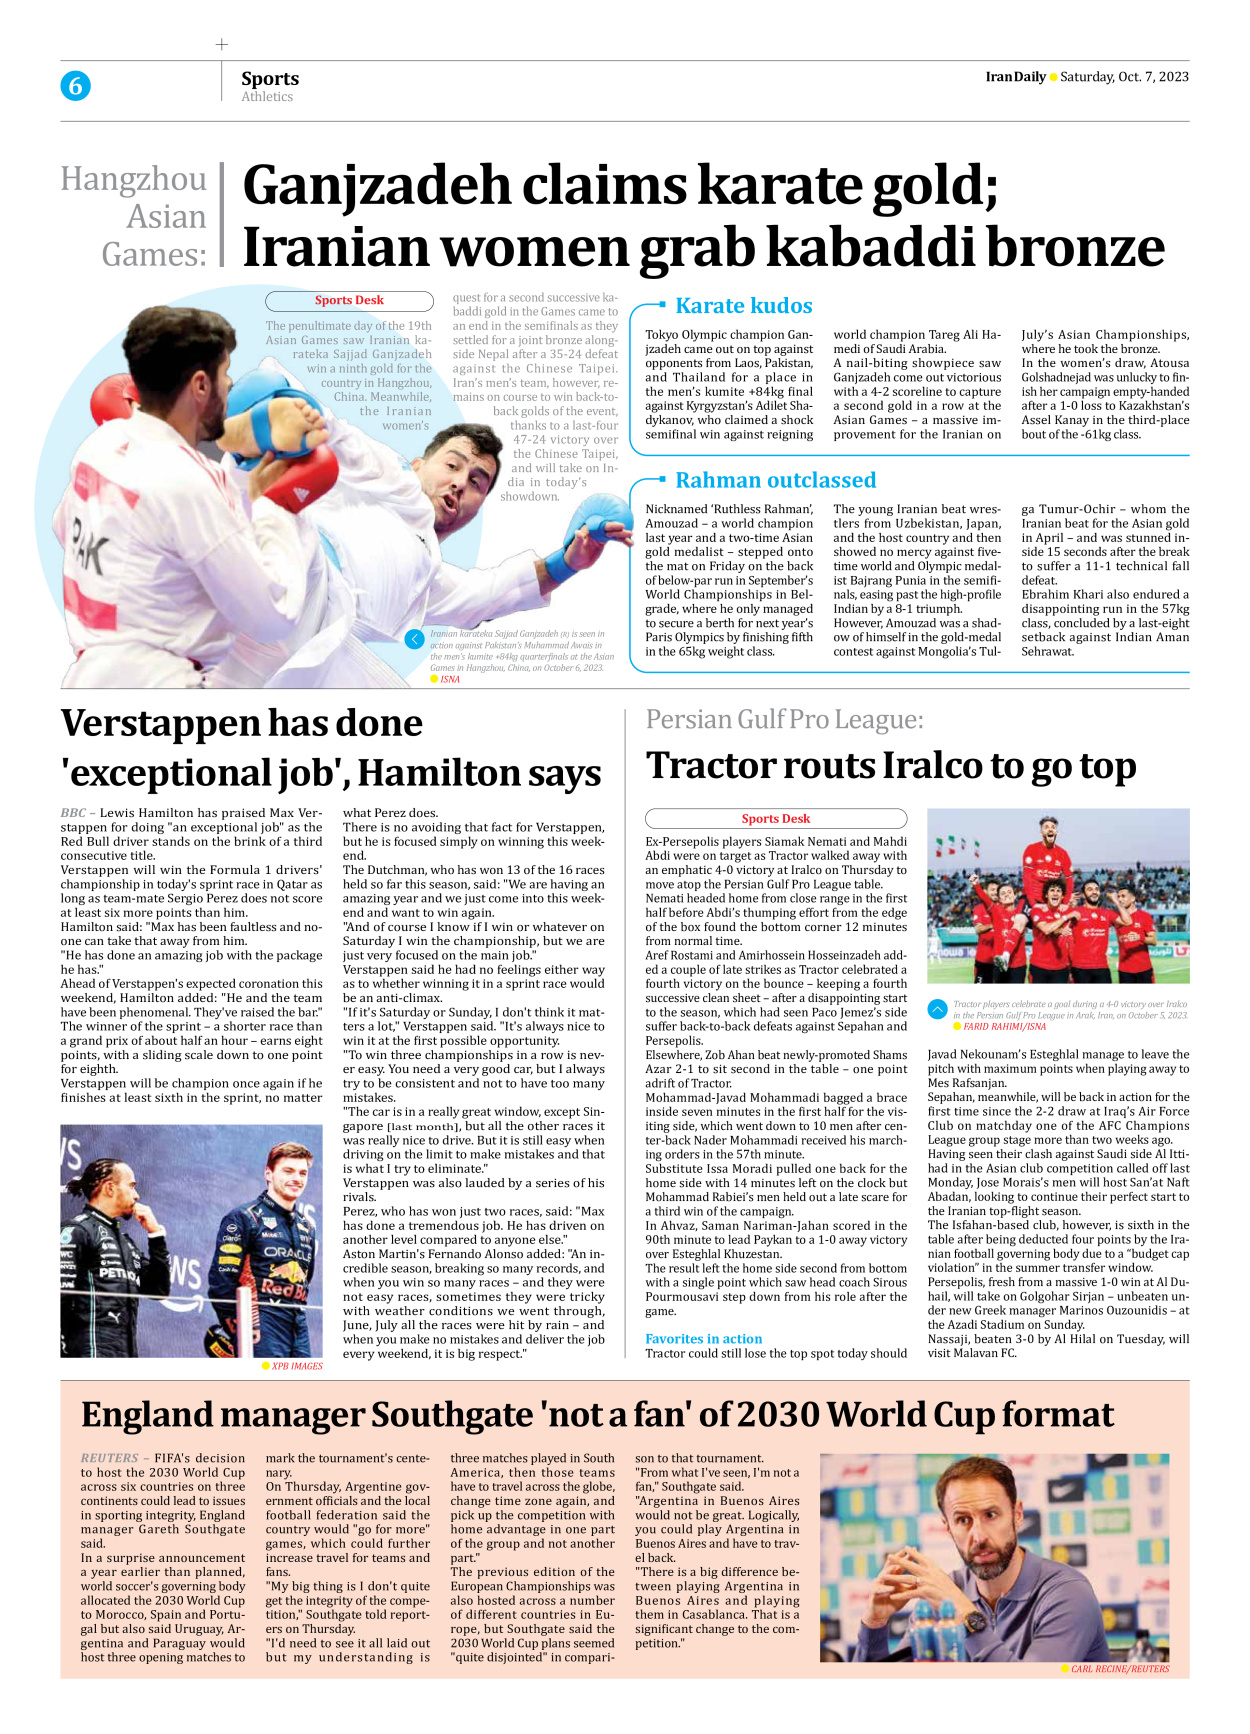 Iran Daily - Number Seven Thousand Four Hundred and One - 07 October 2023 - Page 6